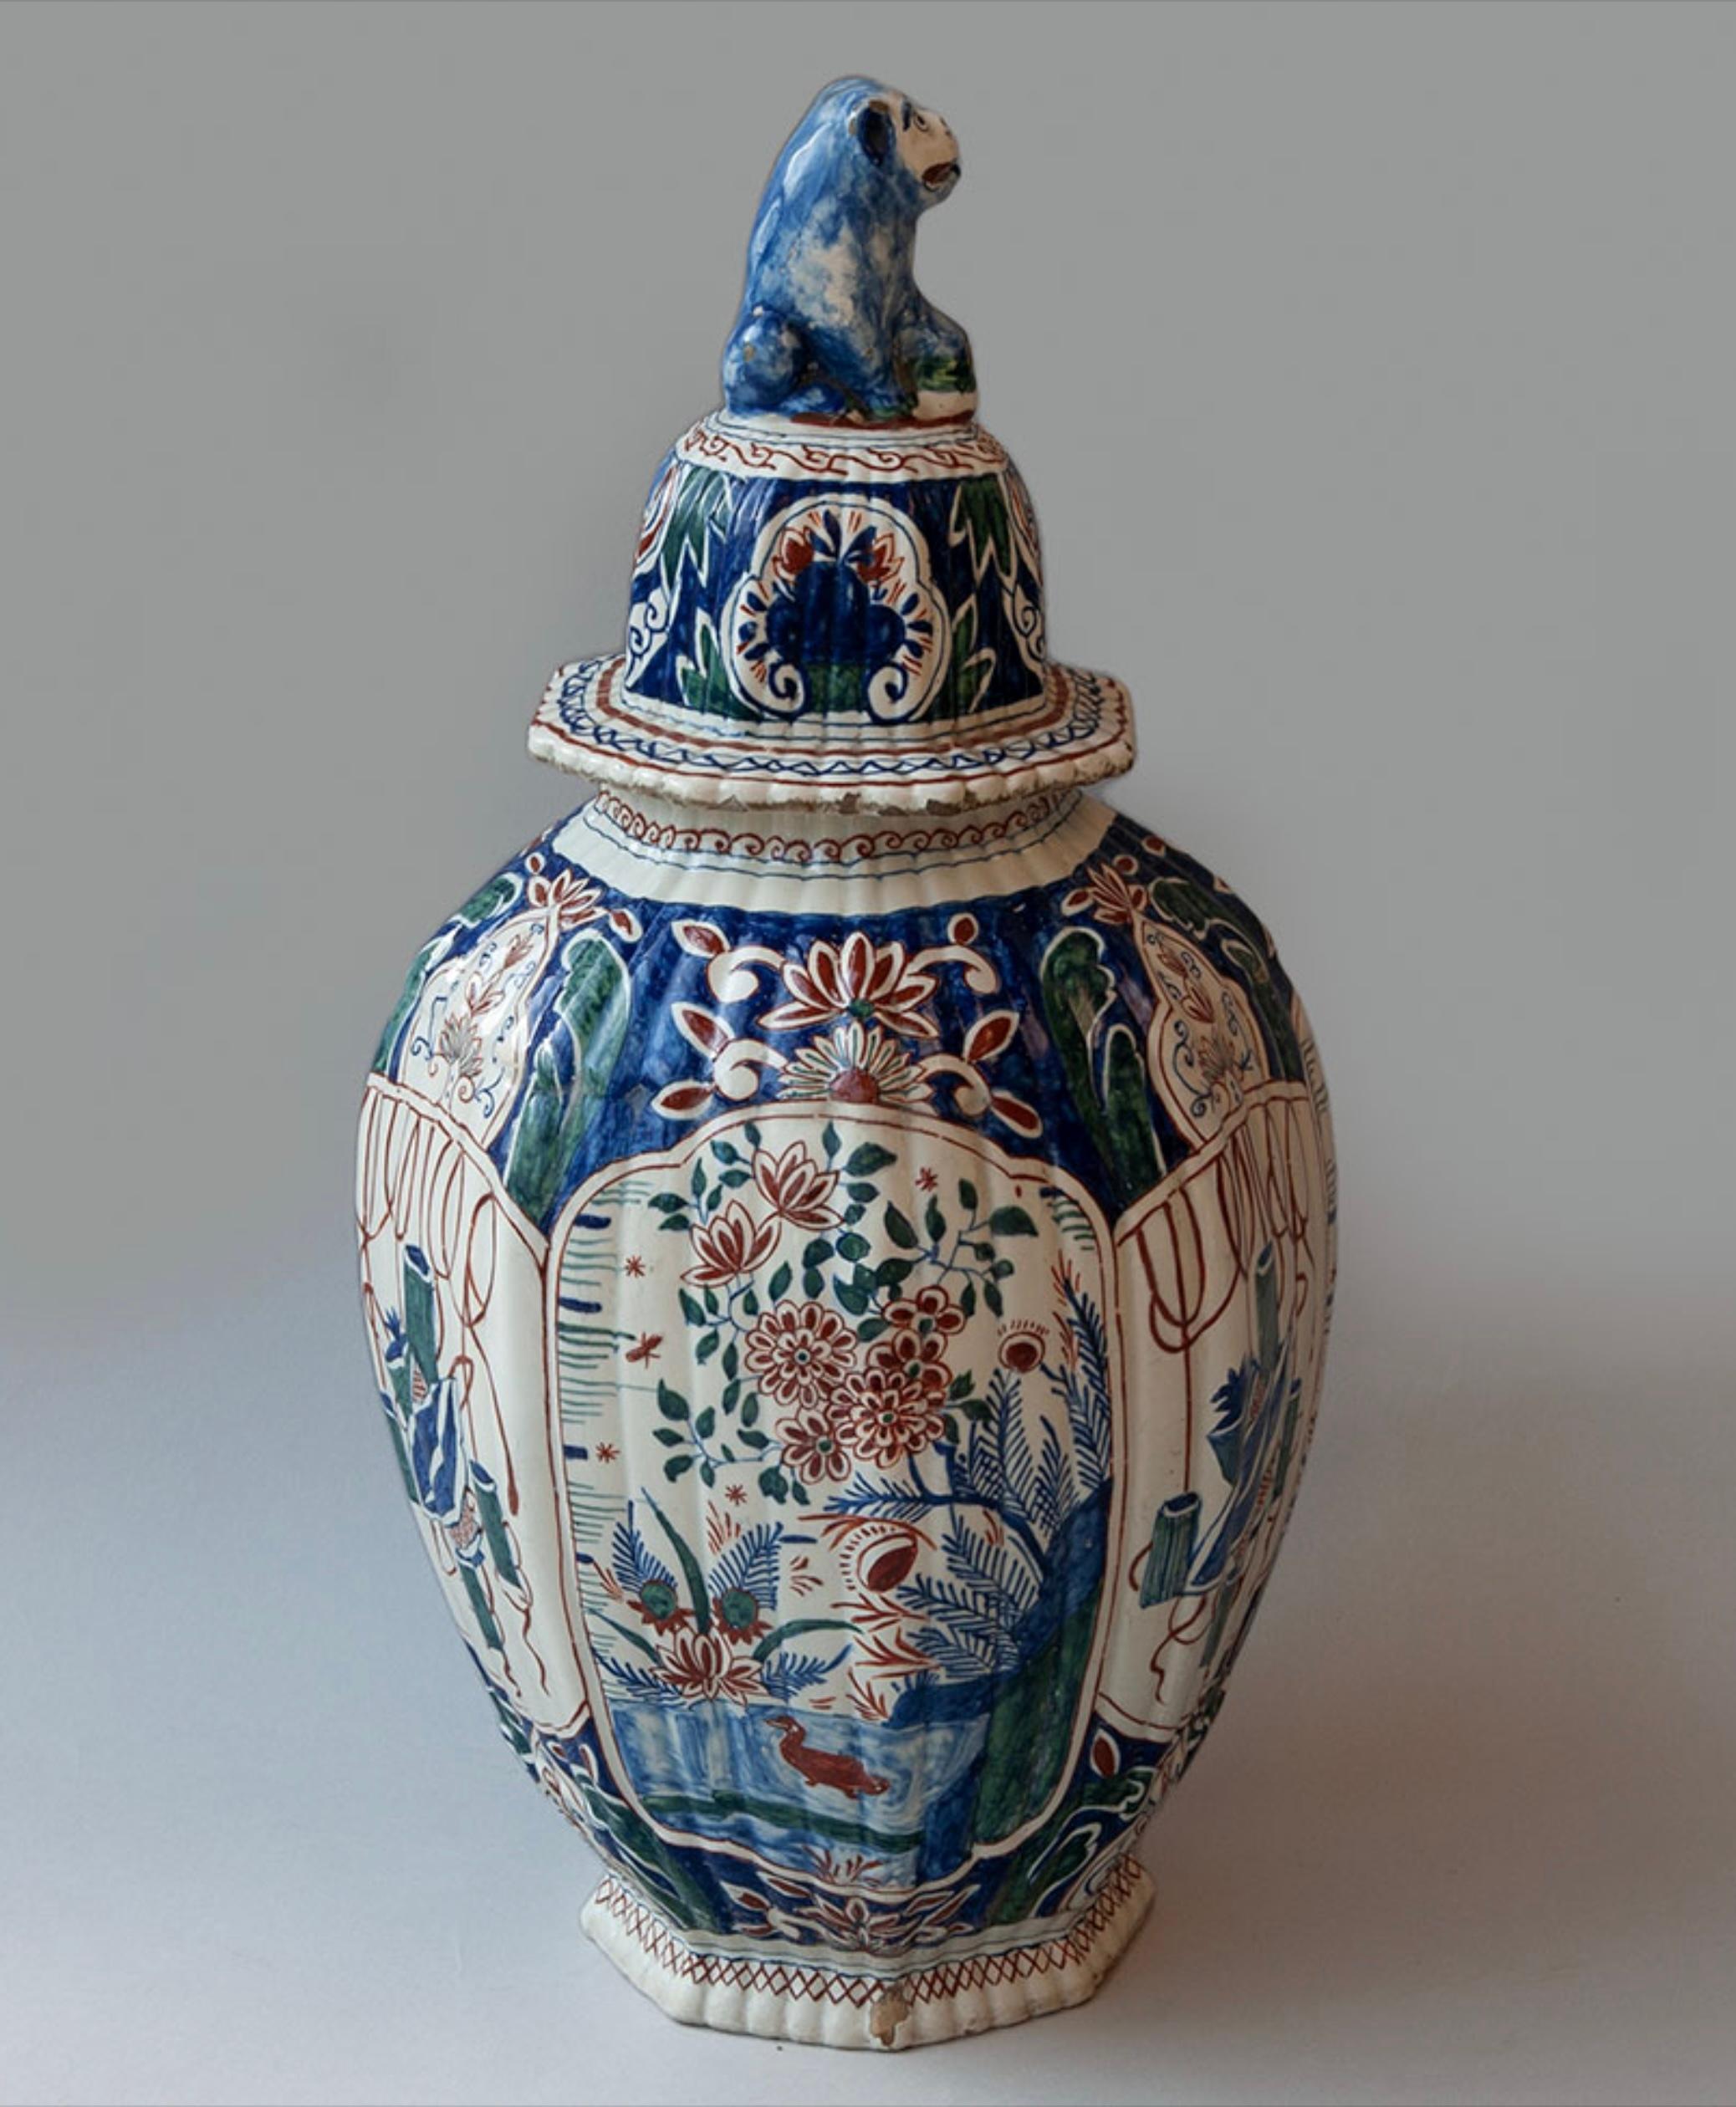 A fine pair of Delft polychrome lidded vases of hexagonal form, decorated in reds, blues and greens on a white ground with birds and flowers and stylised garden objects. The lids similarly decorated and mounted with Fo dog lion finials.